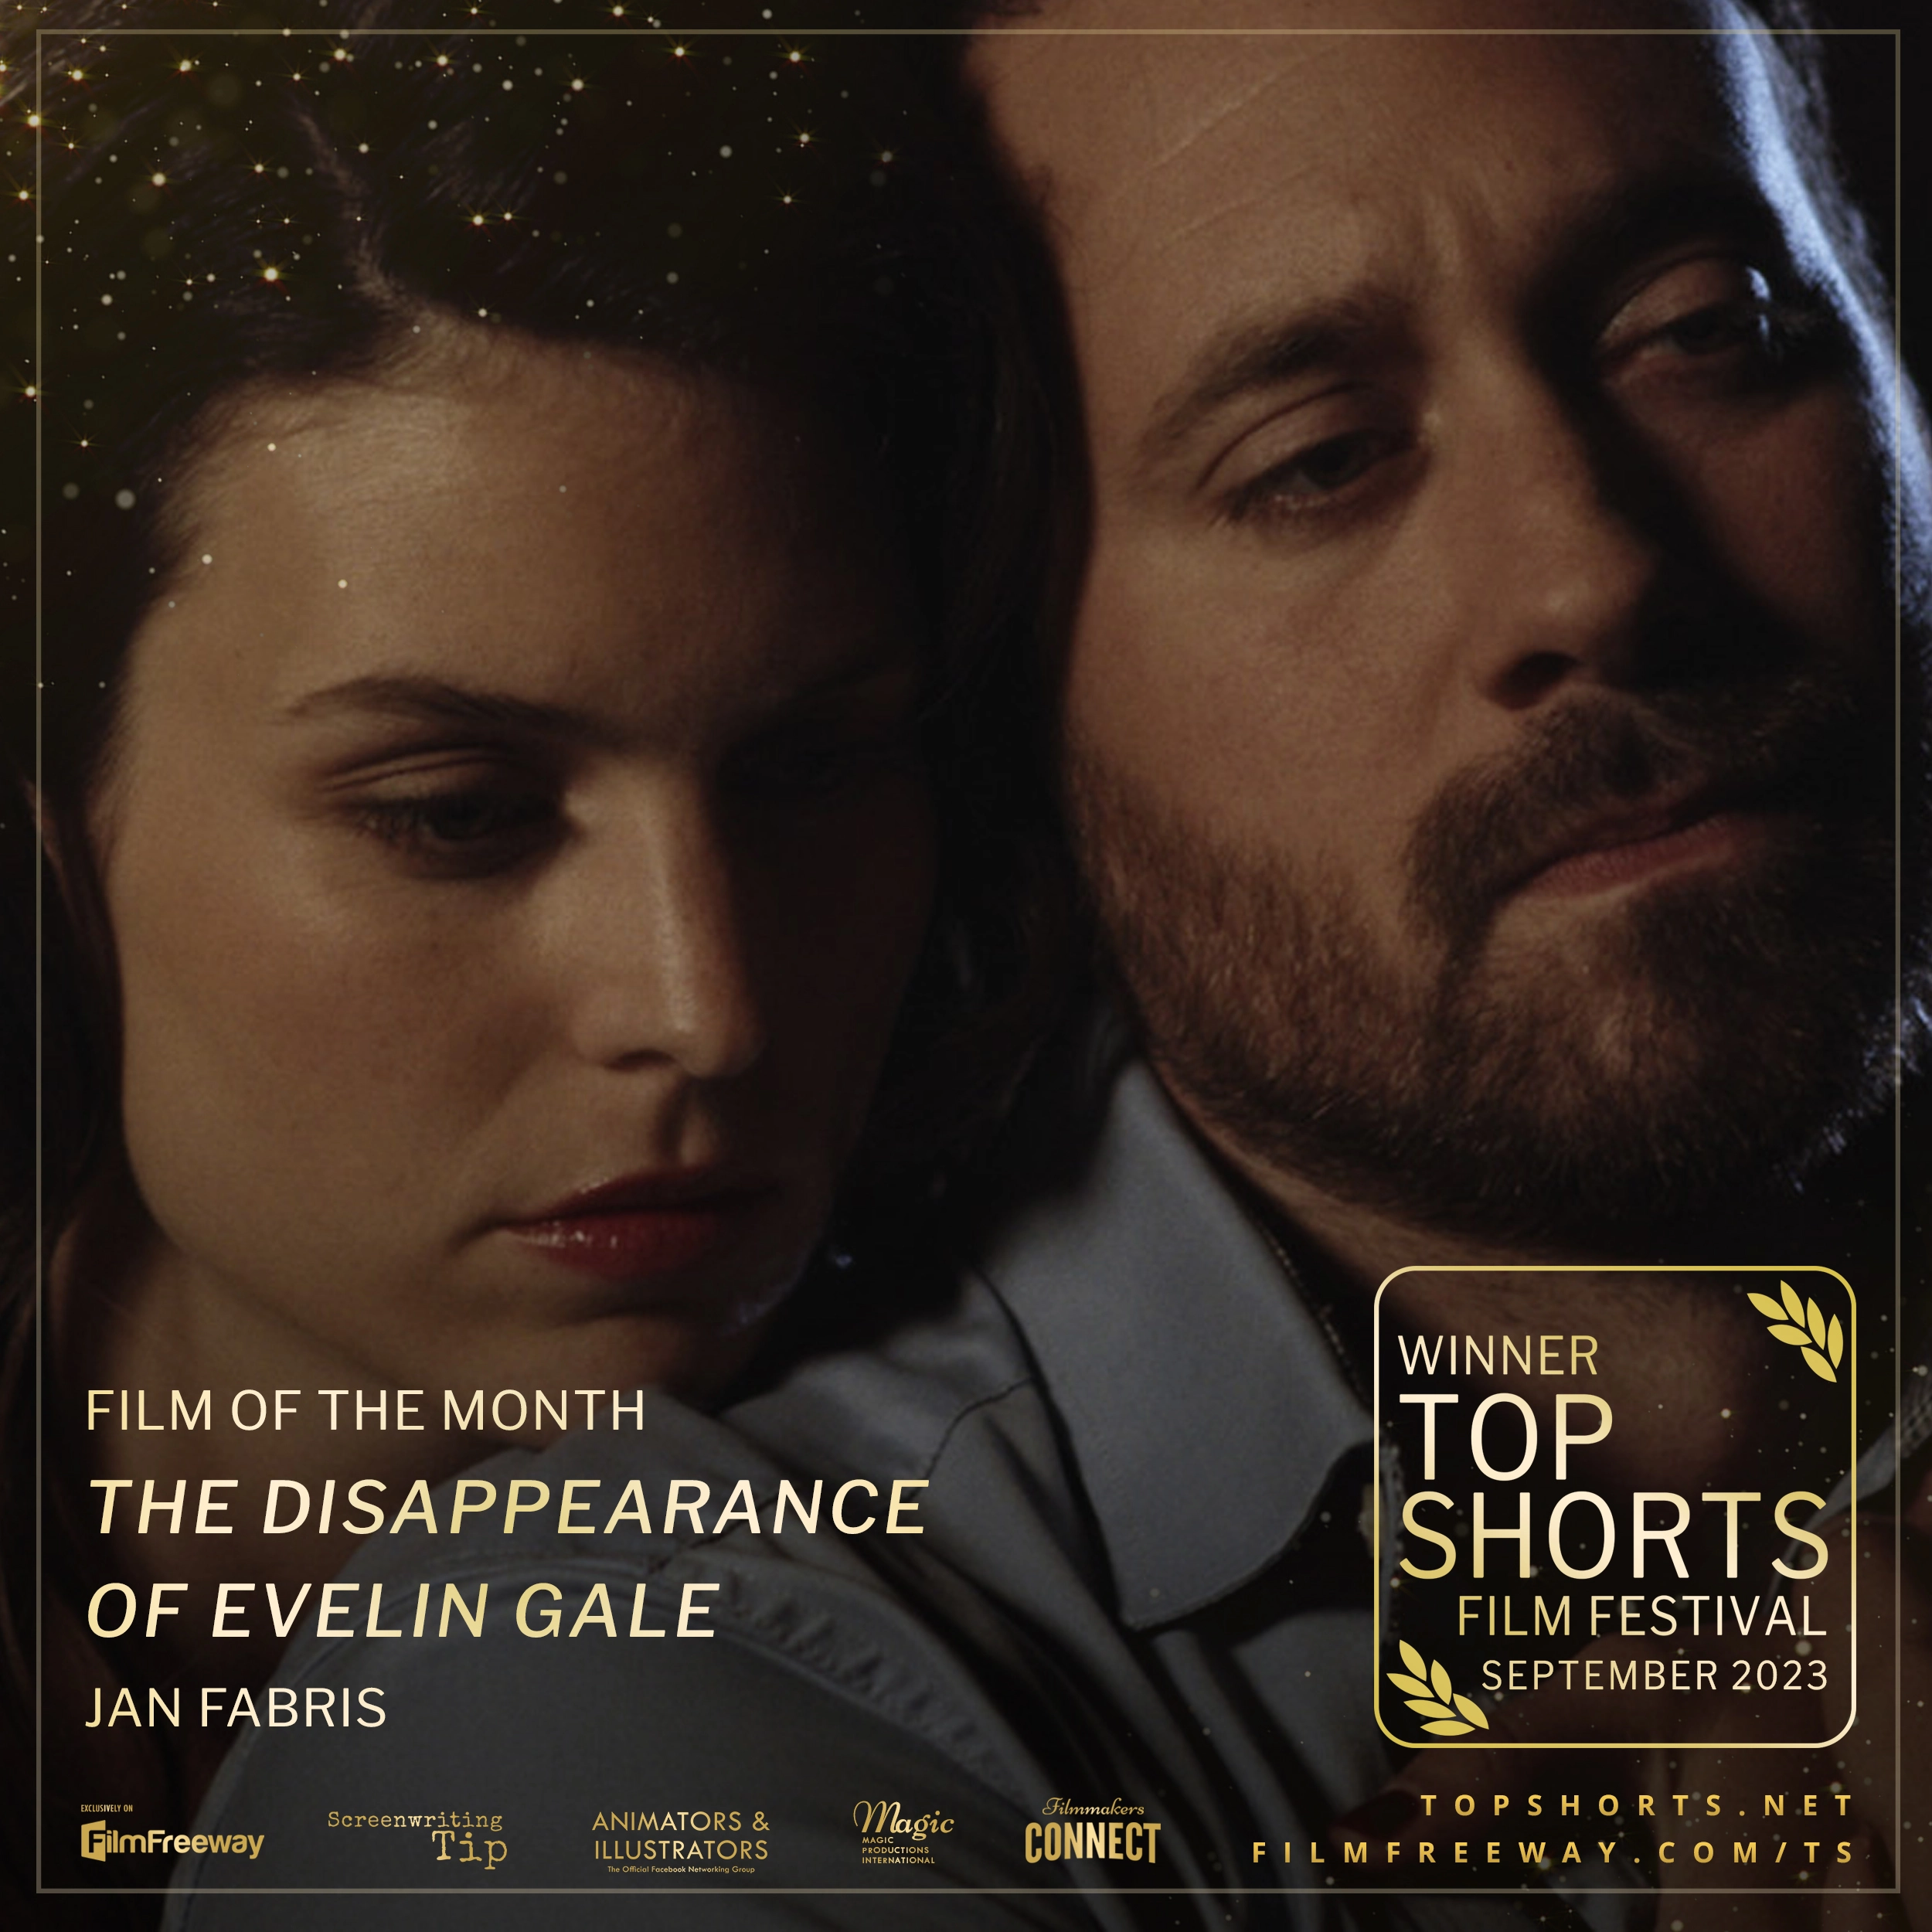 The Disappearance of Evelin Gale won Top Shorts for September 2023